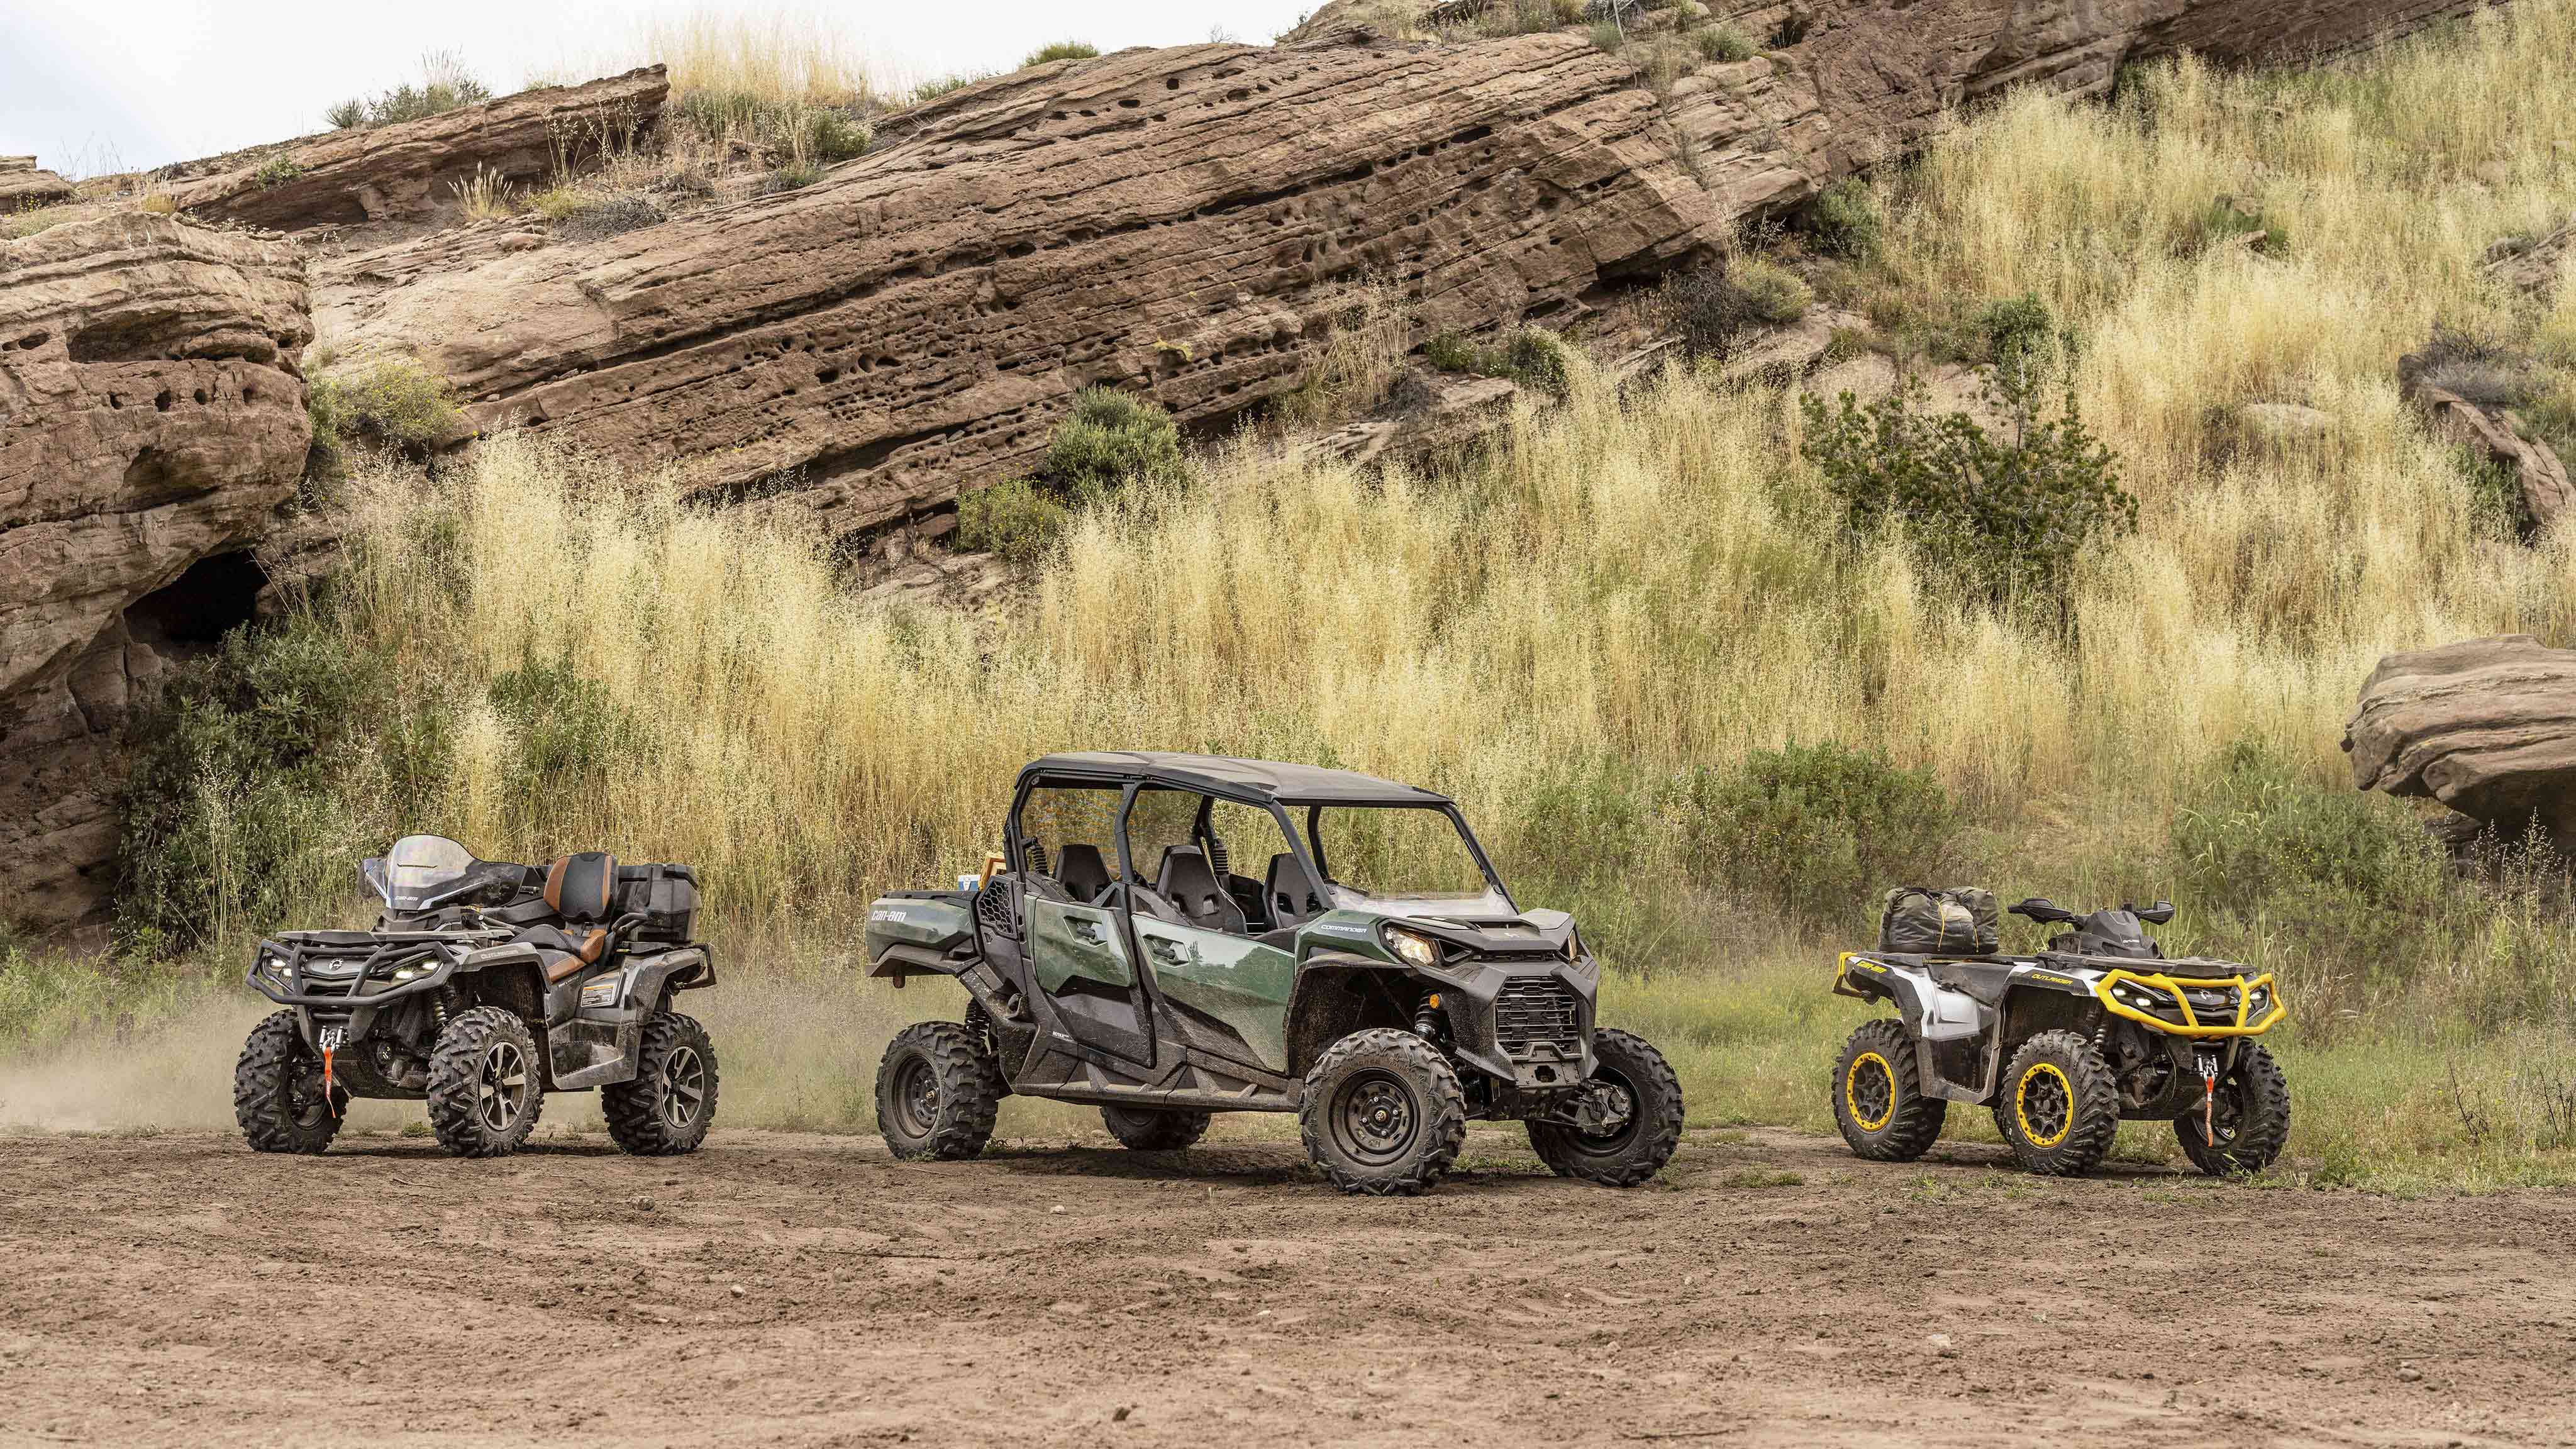 Three different Can-Am Off-Road vehicles parked on a dirt road